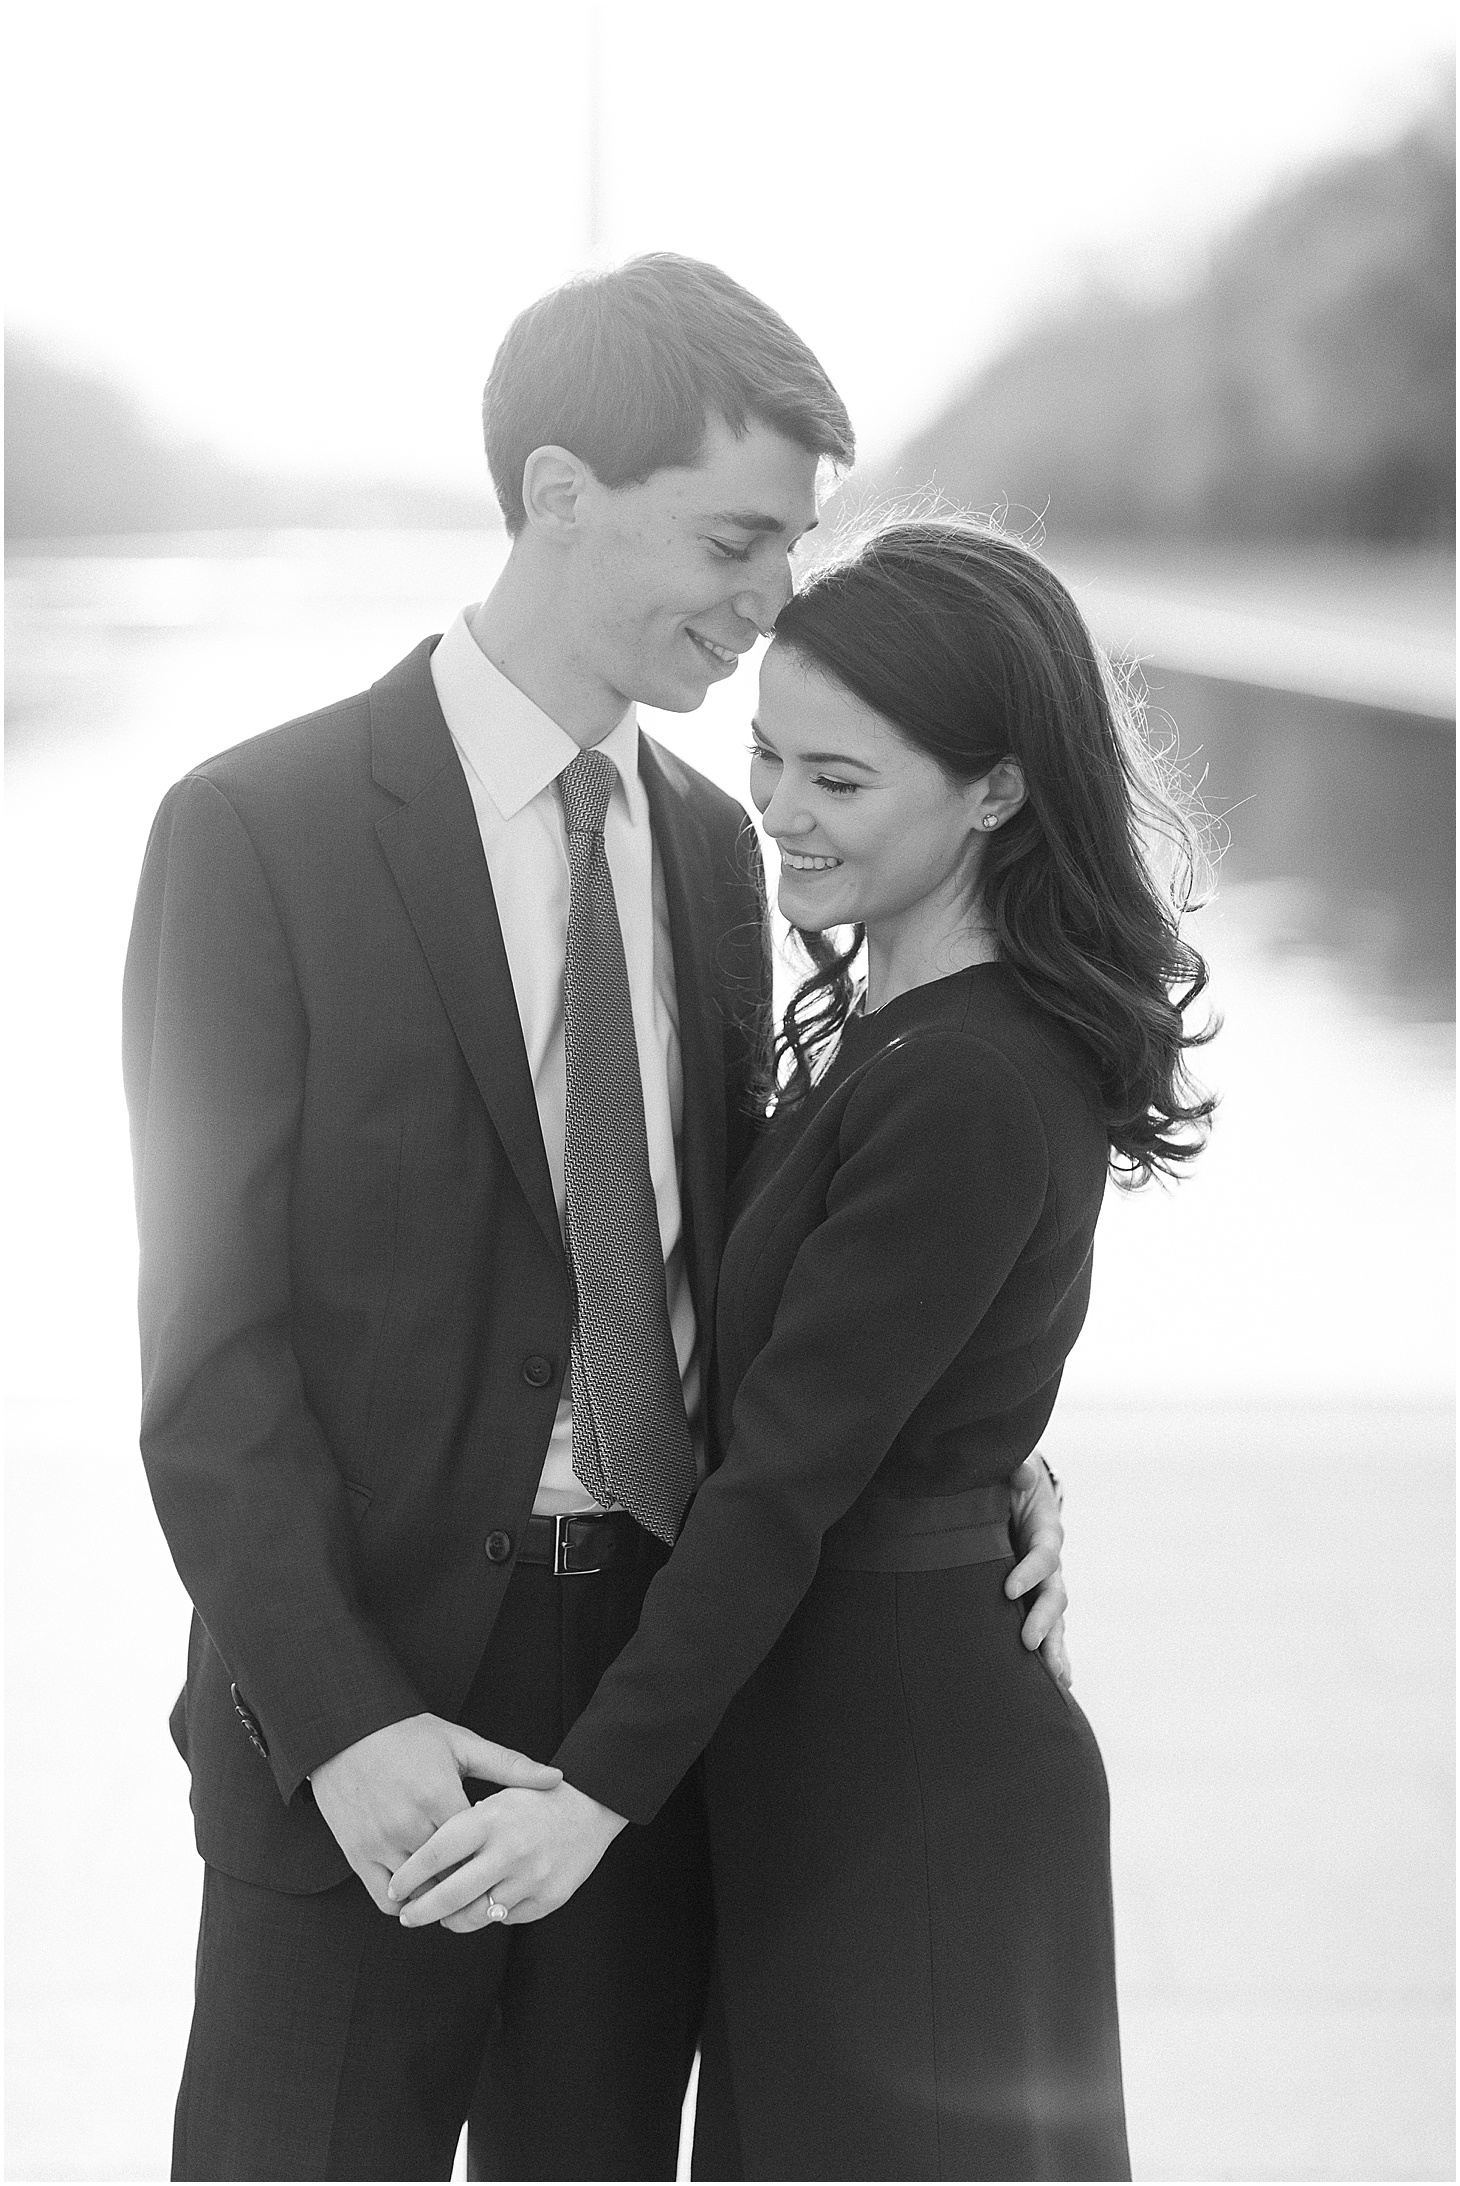 Engagement Portraits at Reflecting Pool in DC, Spring Blooms Engagement Session at the United States Supreme Court, Sarah Bradshaw Photography, DC Engagement Photographer